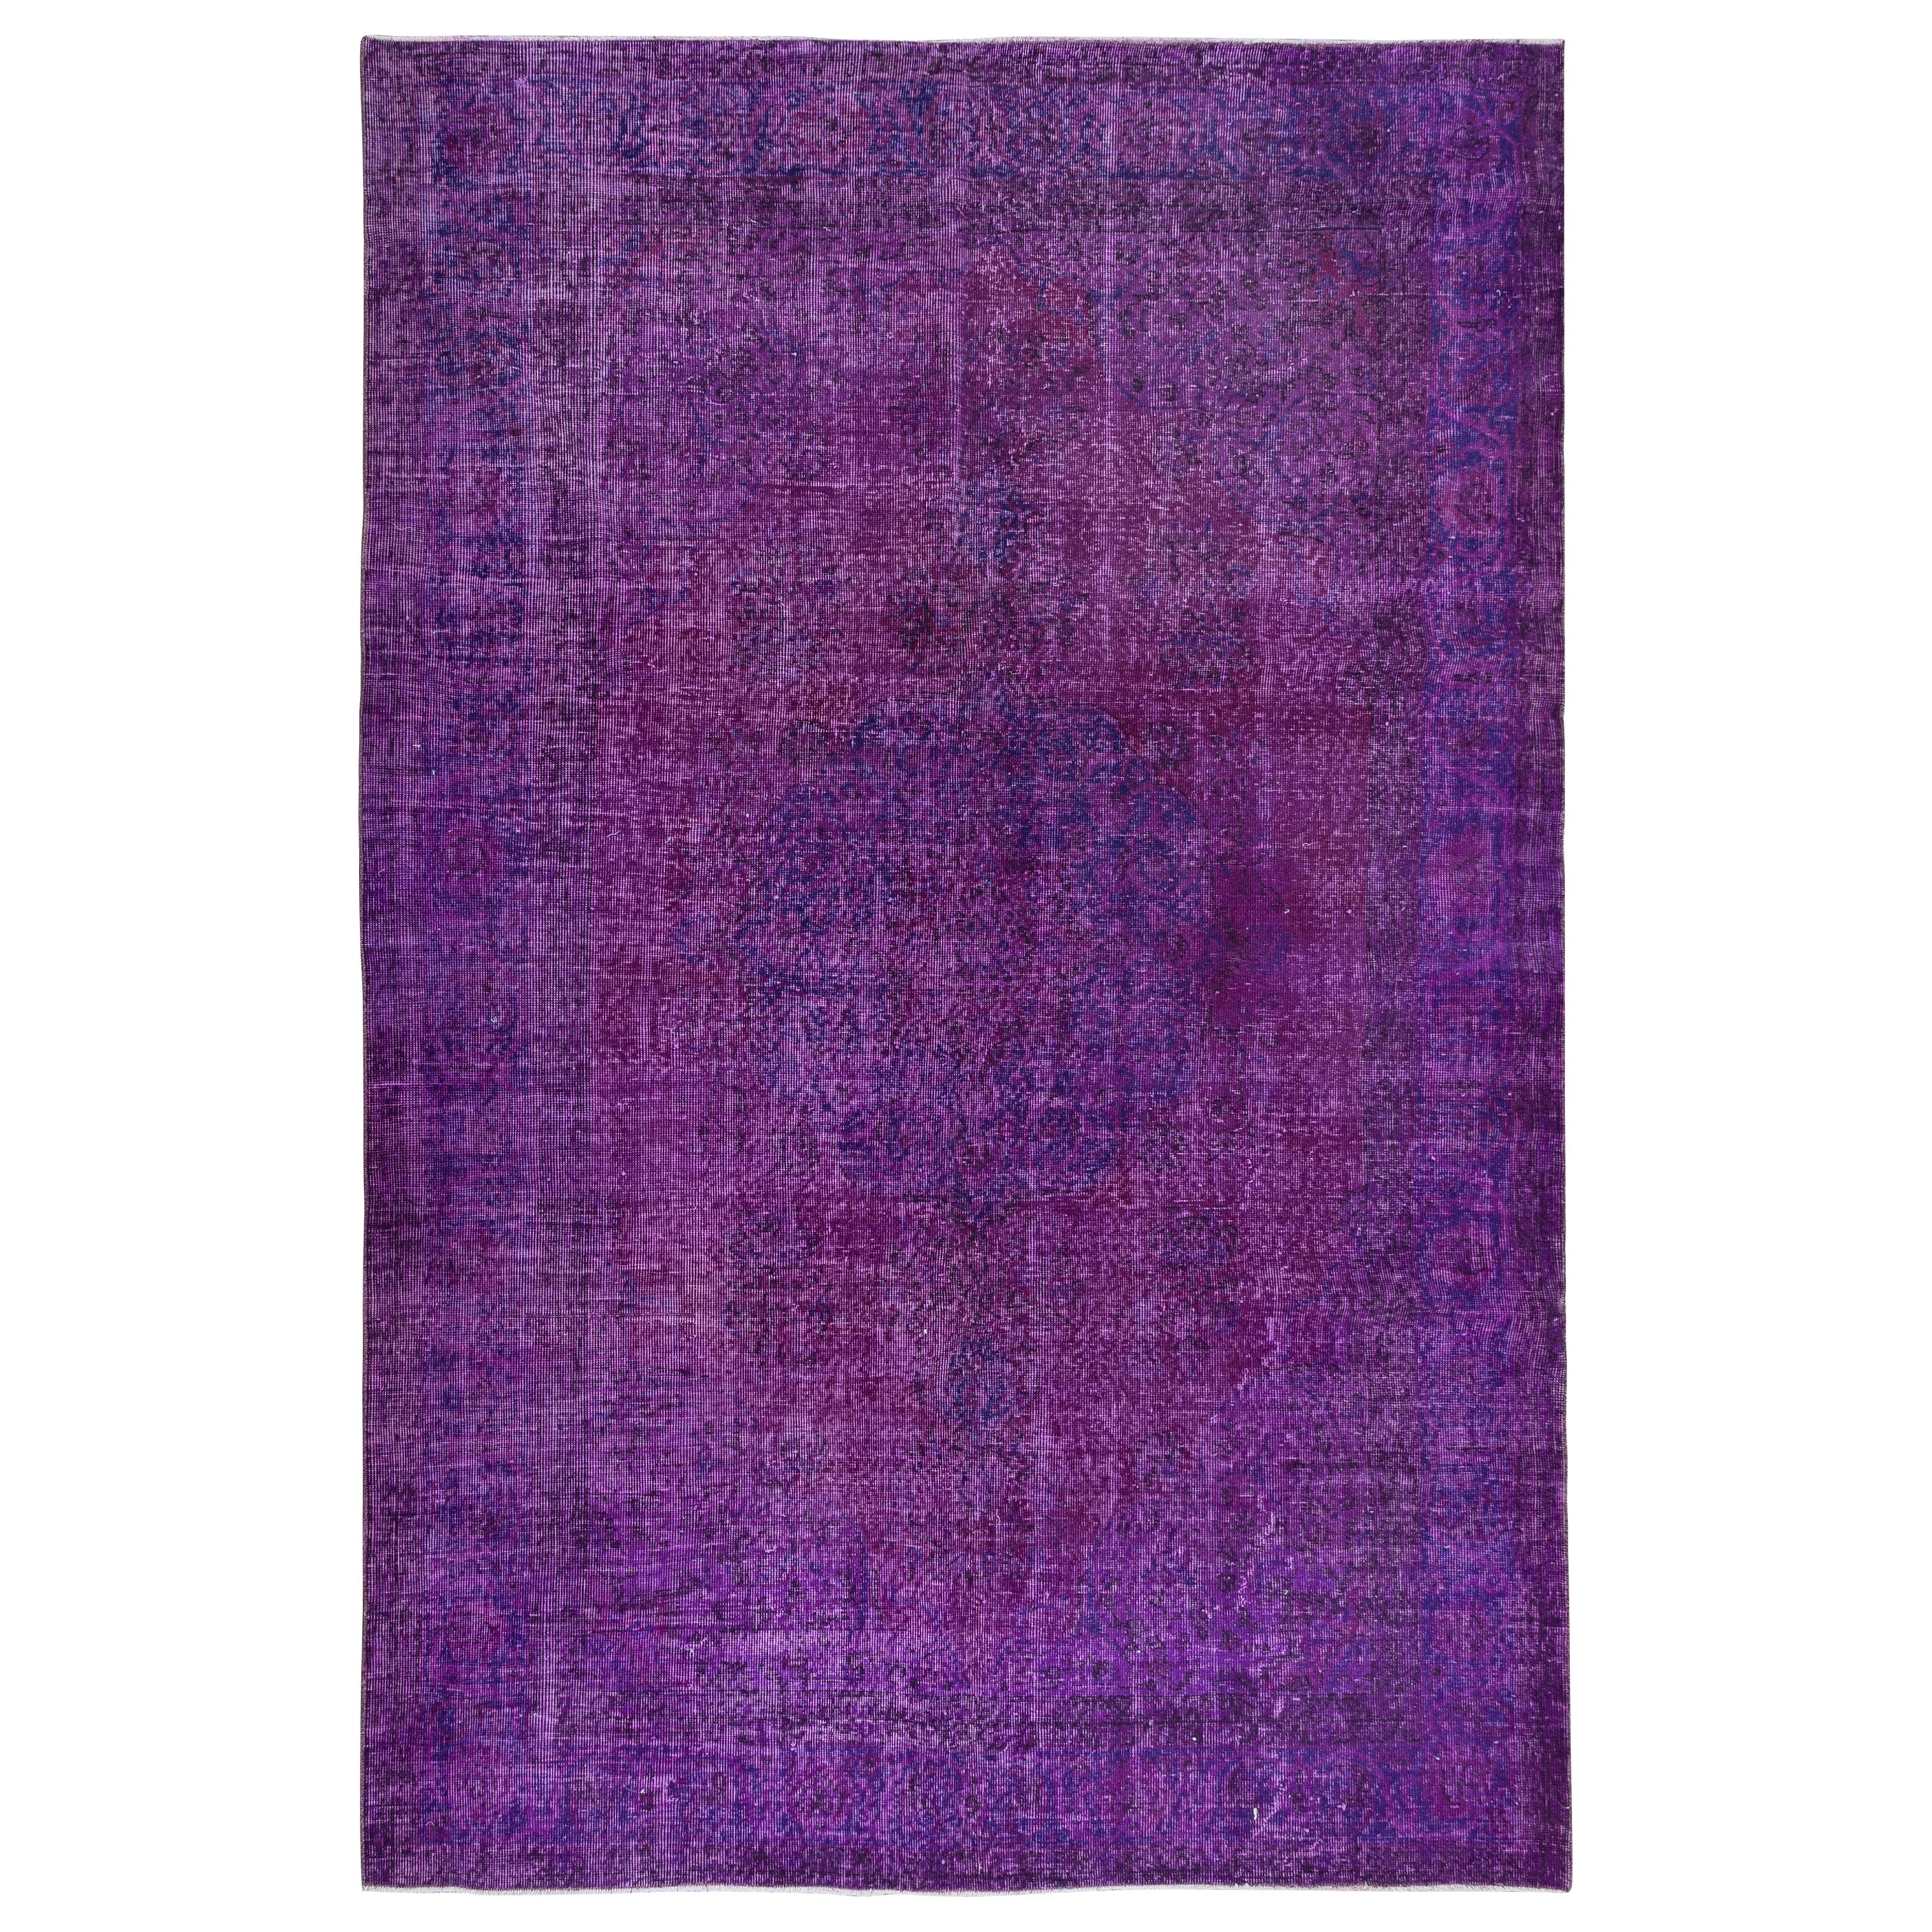 7x10.2 Ft Contemporary Handmade Turkish Area Rug in Purple & Violet Colors For Sale